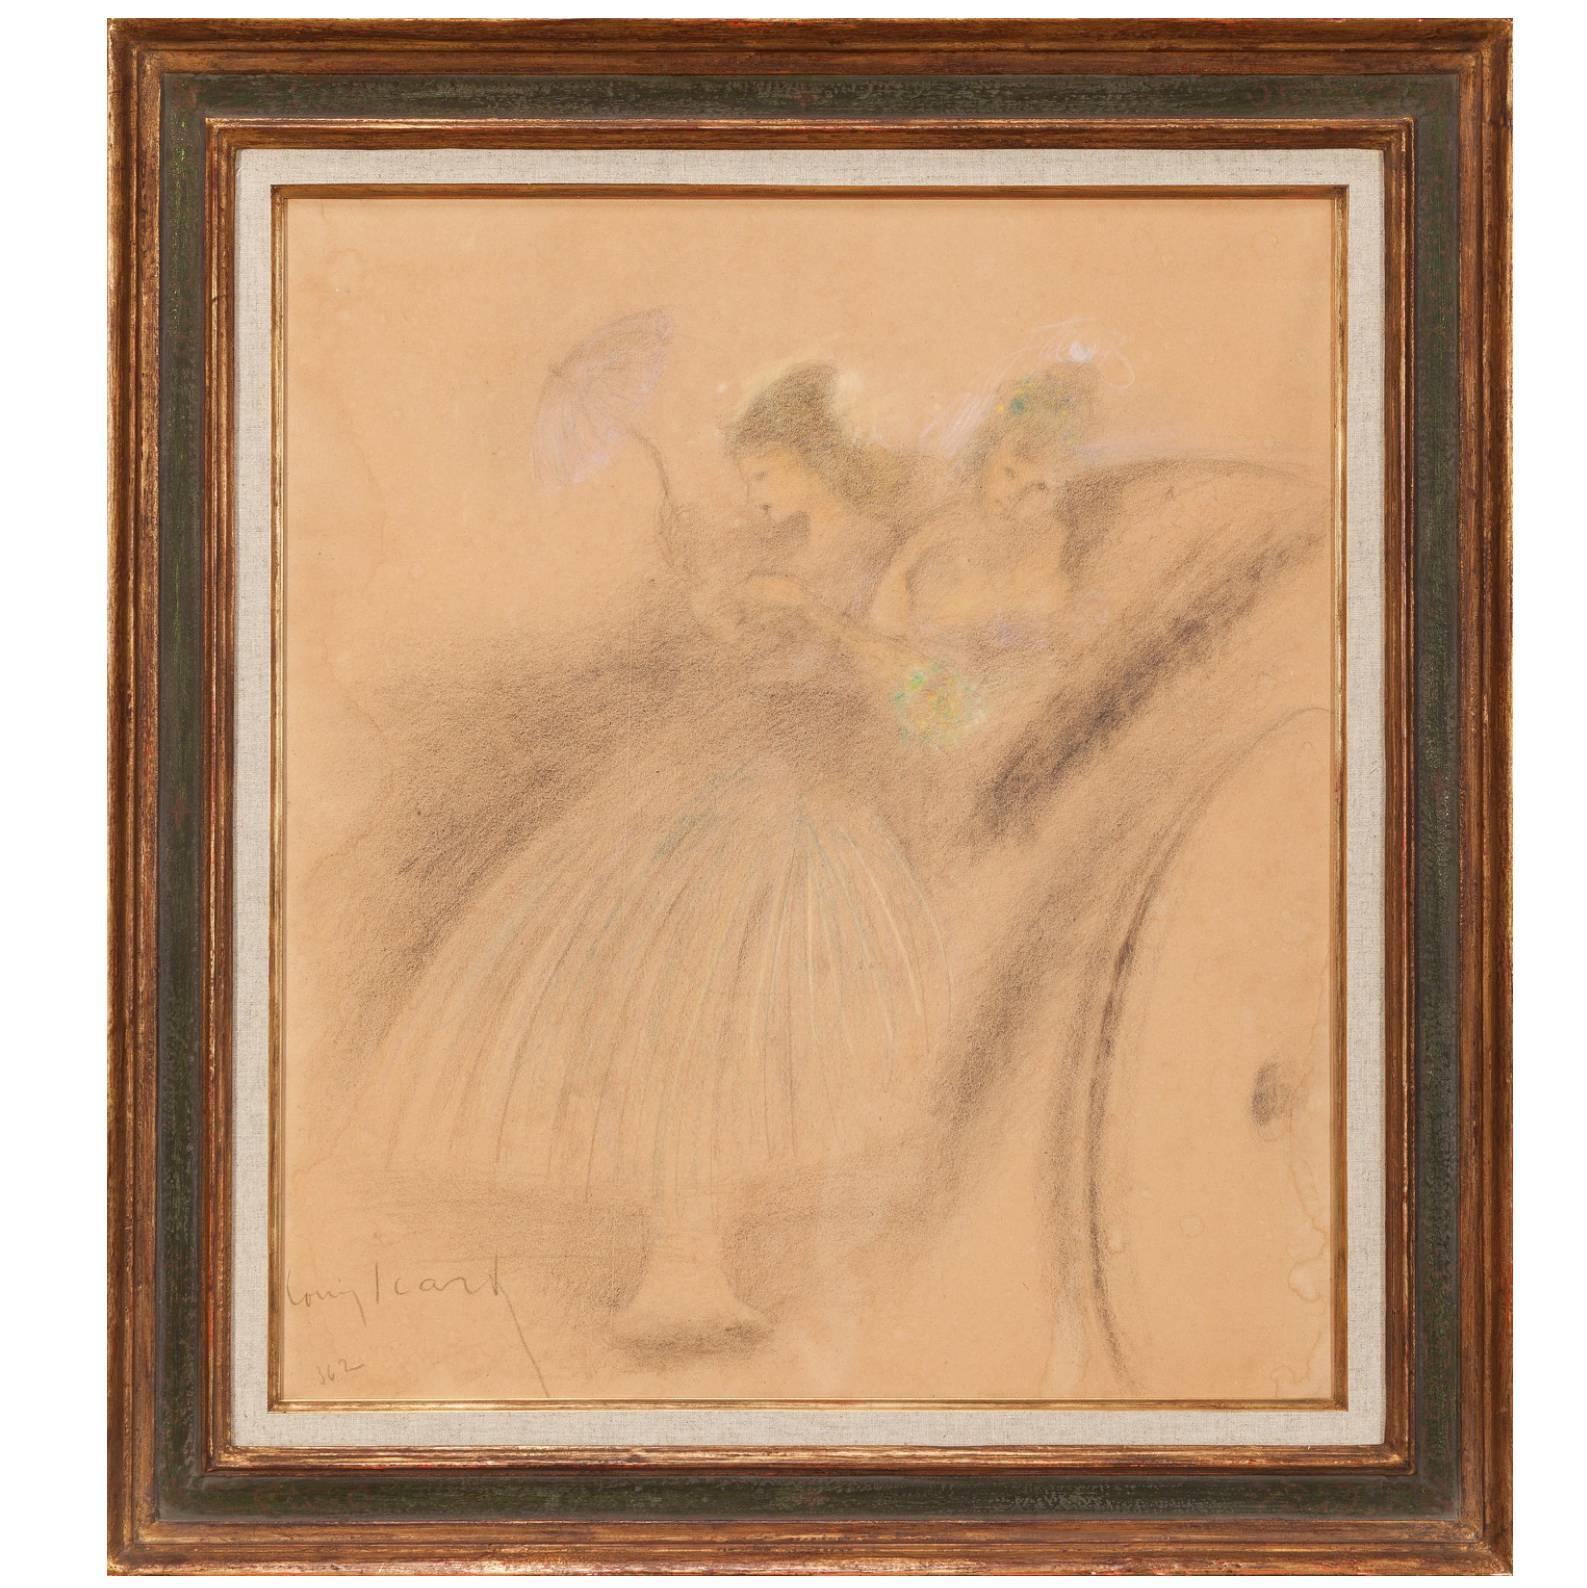 Louis Icart (French, 1888-1950). Ladies in a carriage. Pastel on Paper. 

20-5/8 x 18-1/2 inches (52.3 x 47.0 cm). 

Louis Icart (French, 1888-1950).
Ladies in a carriage.
Pastel on paper.
20-5/8 x 18-1/2 inches (52.3 x 47.0 cm).
Signed and